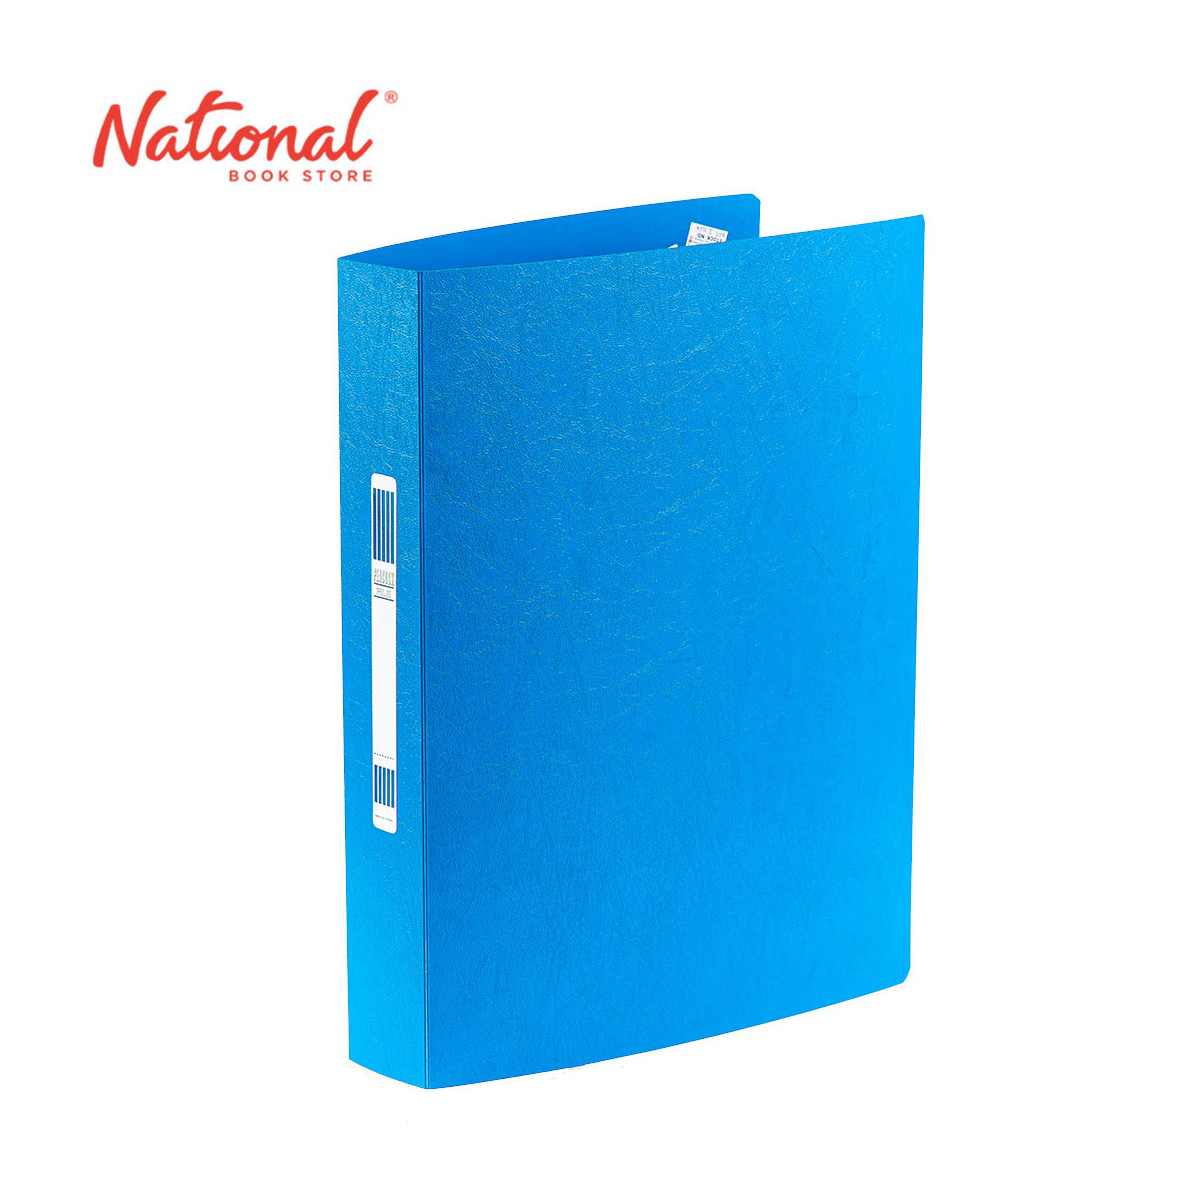 Seagull Ring Binder 3R JC355W Long 1.5 Inch D Type PP Cover Blue - School & Office - Filing Supplies